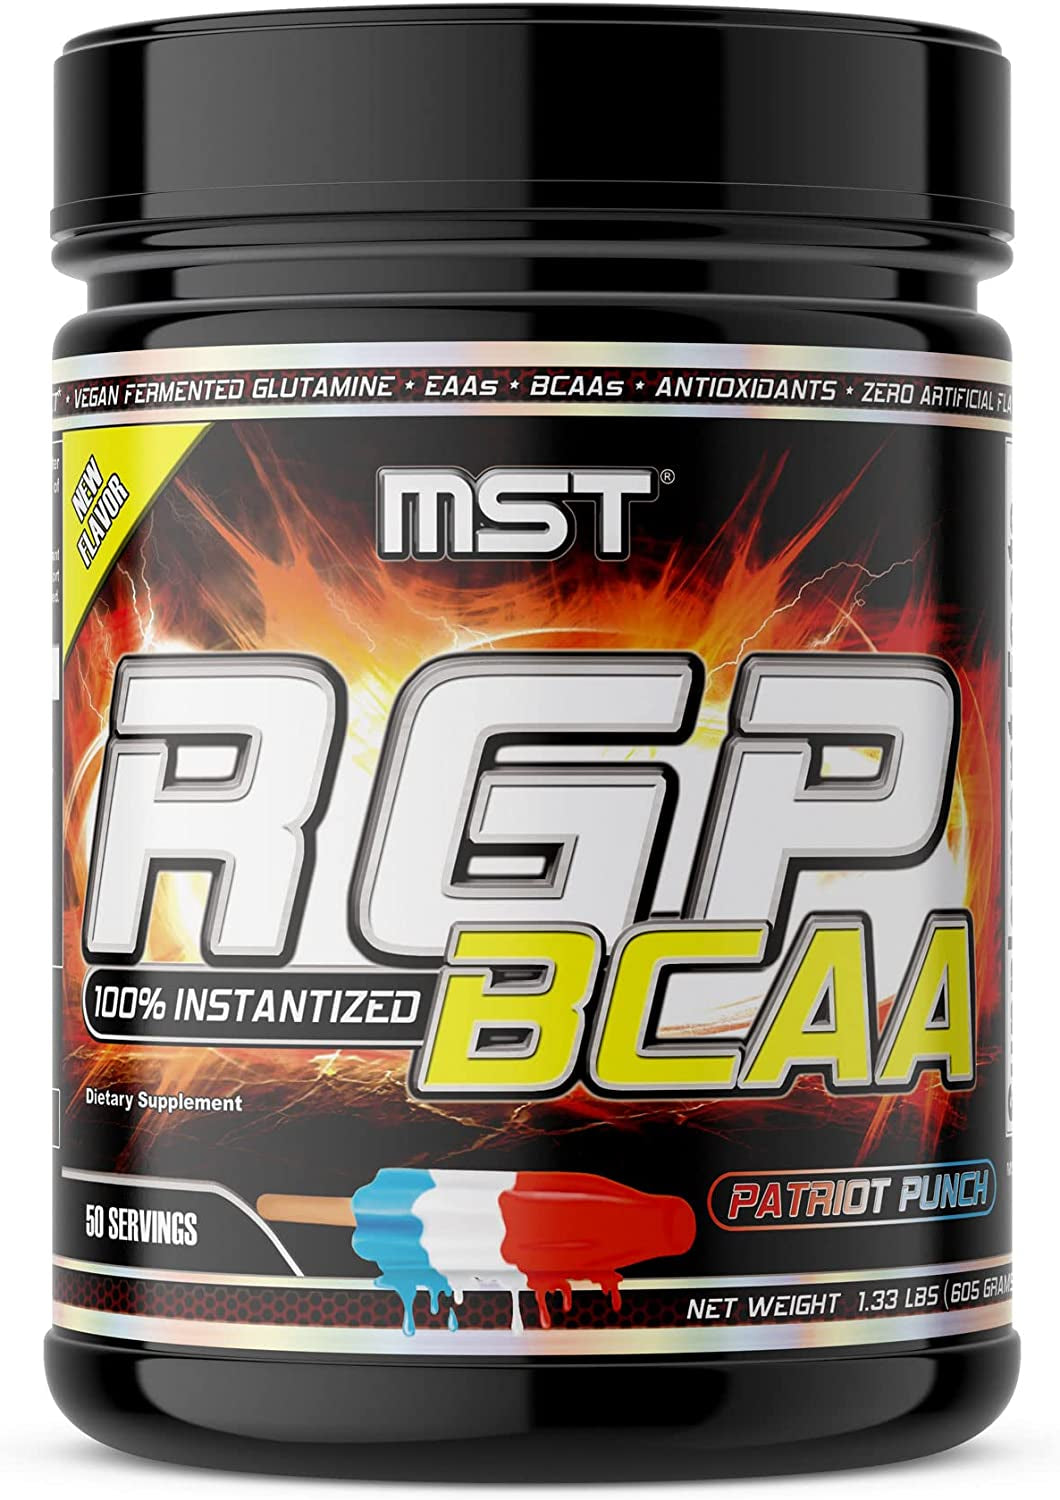 MST RGP BCAA Post Workout, BCAA, L-Glutamine, EAA, Antioxidants, Electrolytes (50 Servings) Patriot Punch by Millennium Sport Technologies